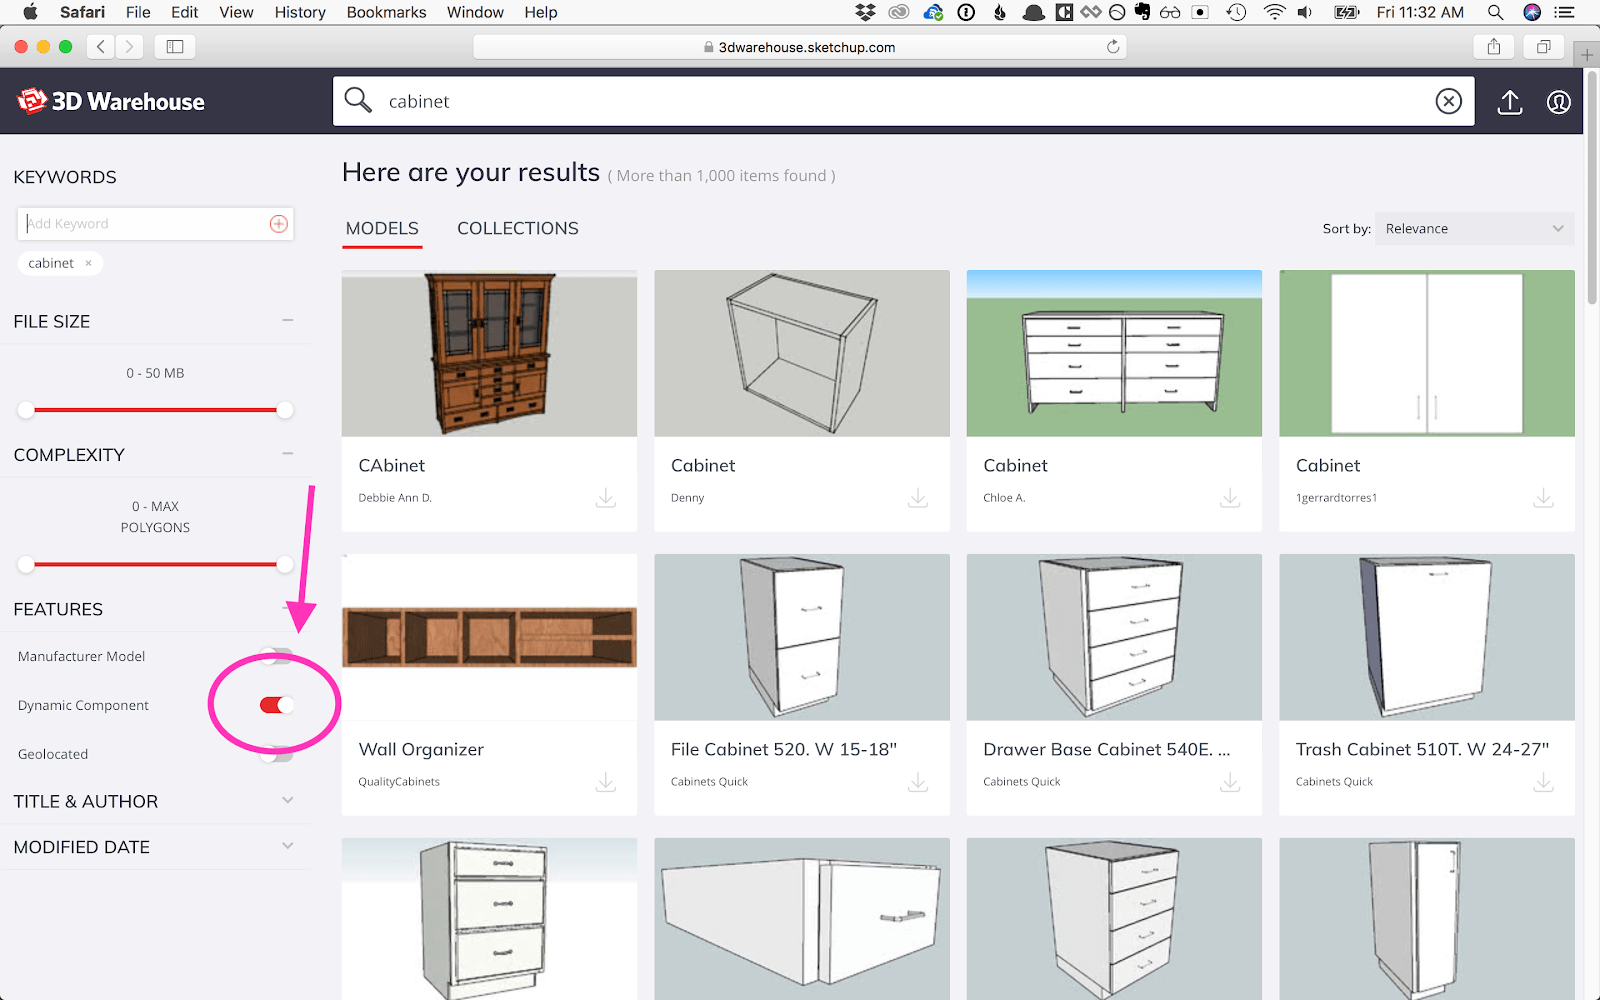 sketchup 3d warehouse without sign in